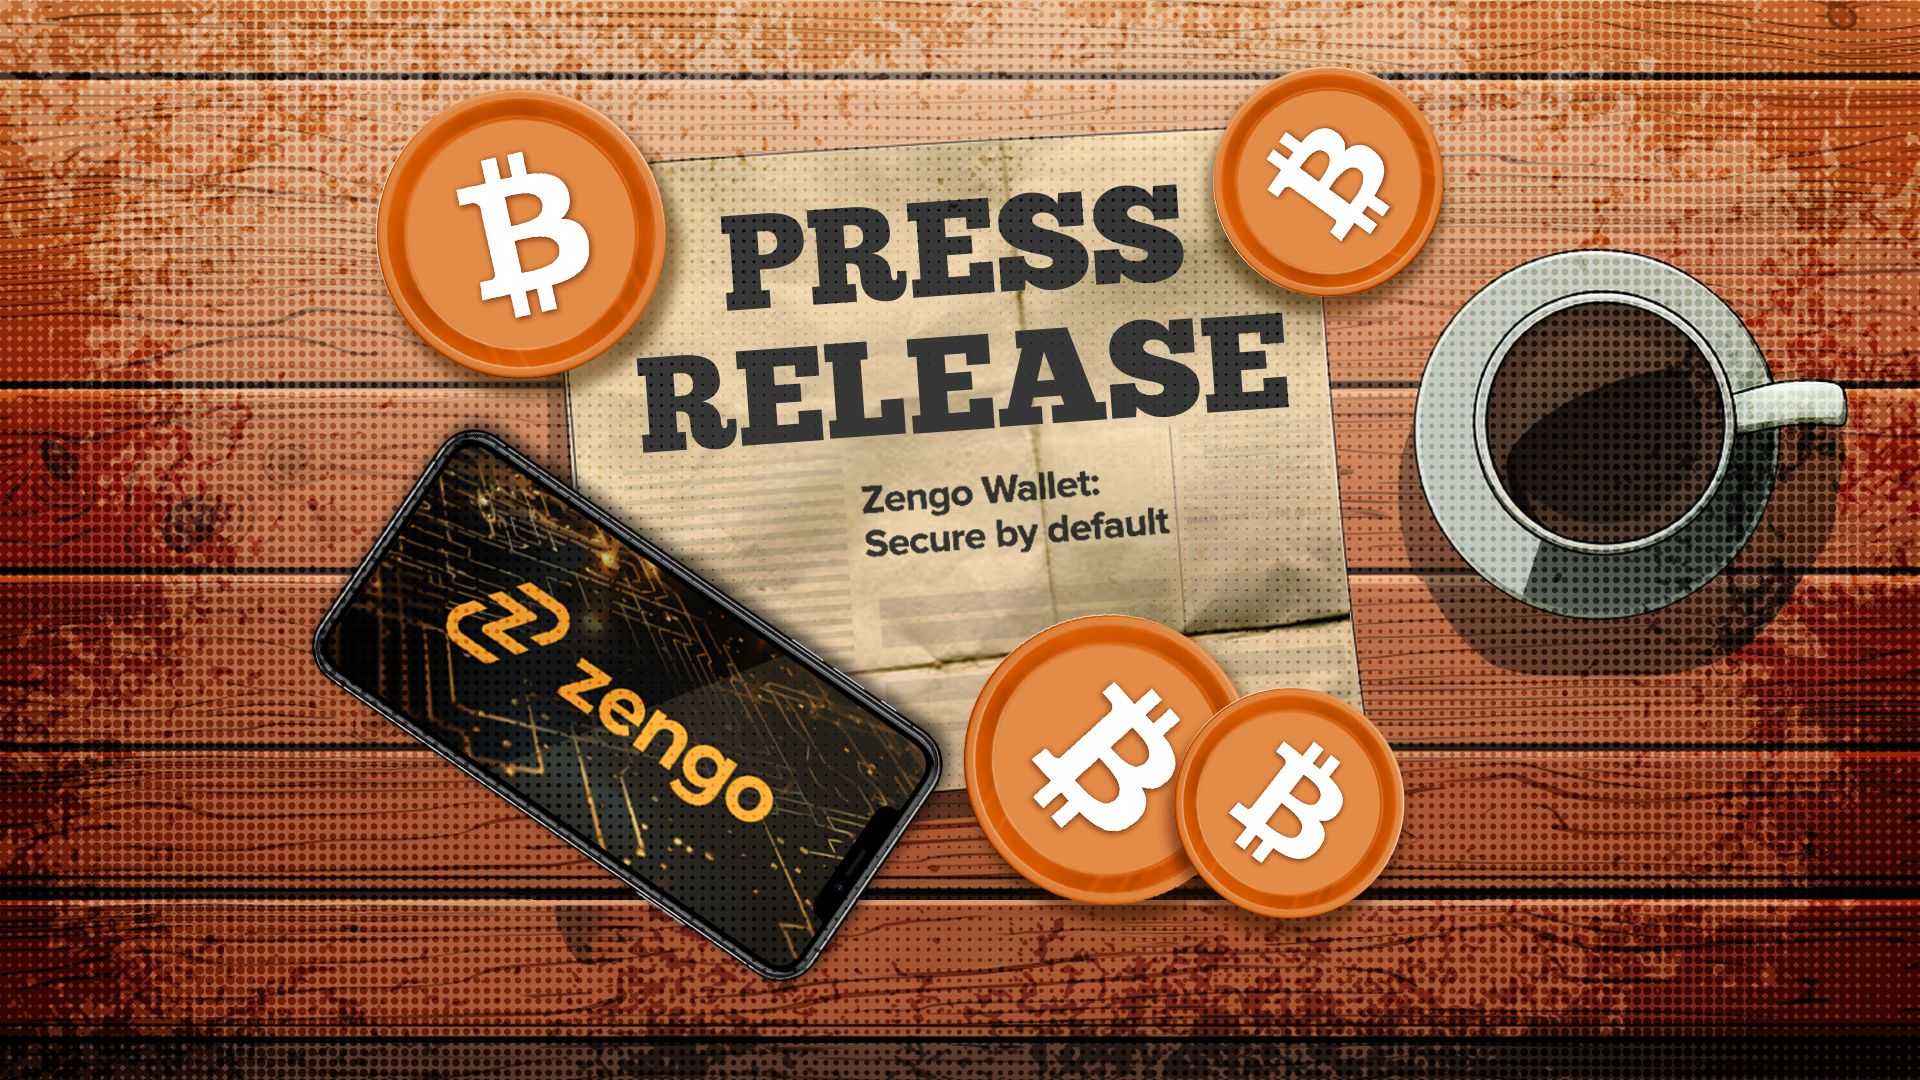 Beyond Bounty: Zengo Wallet leaves 10 BTC on-chain for hackers to take